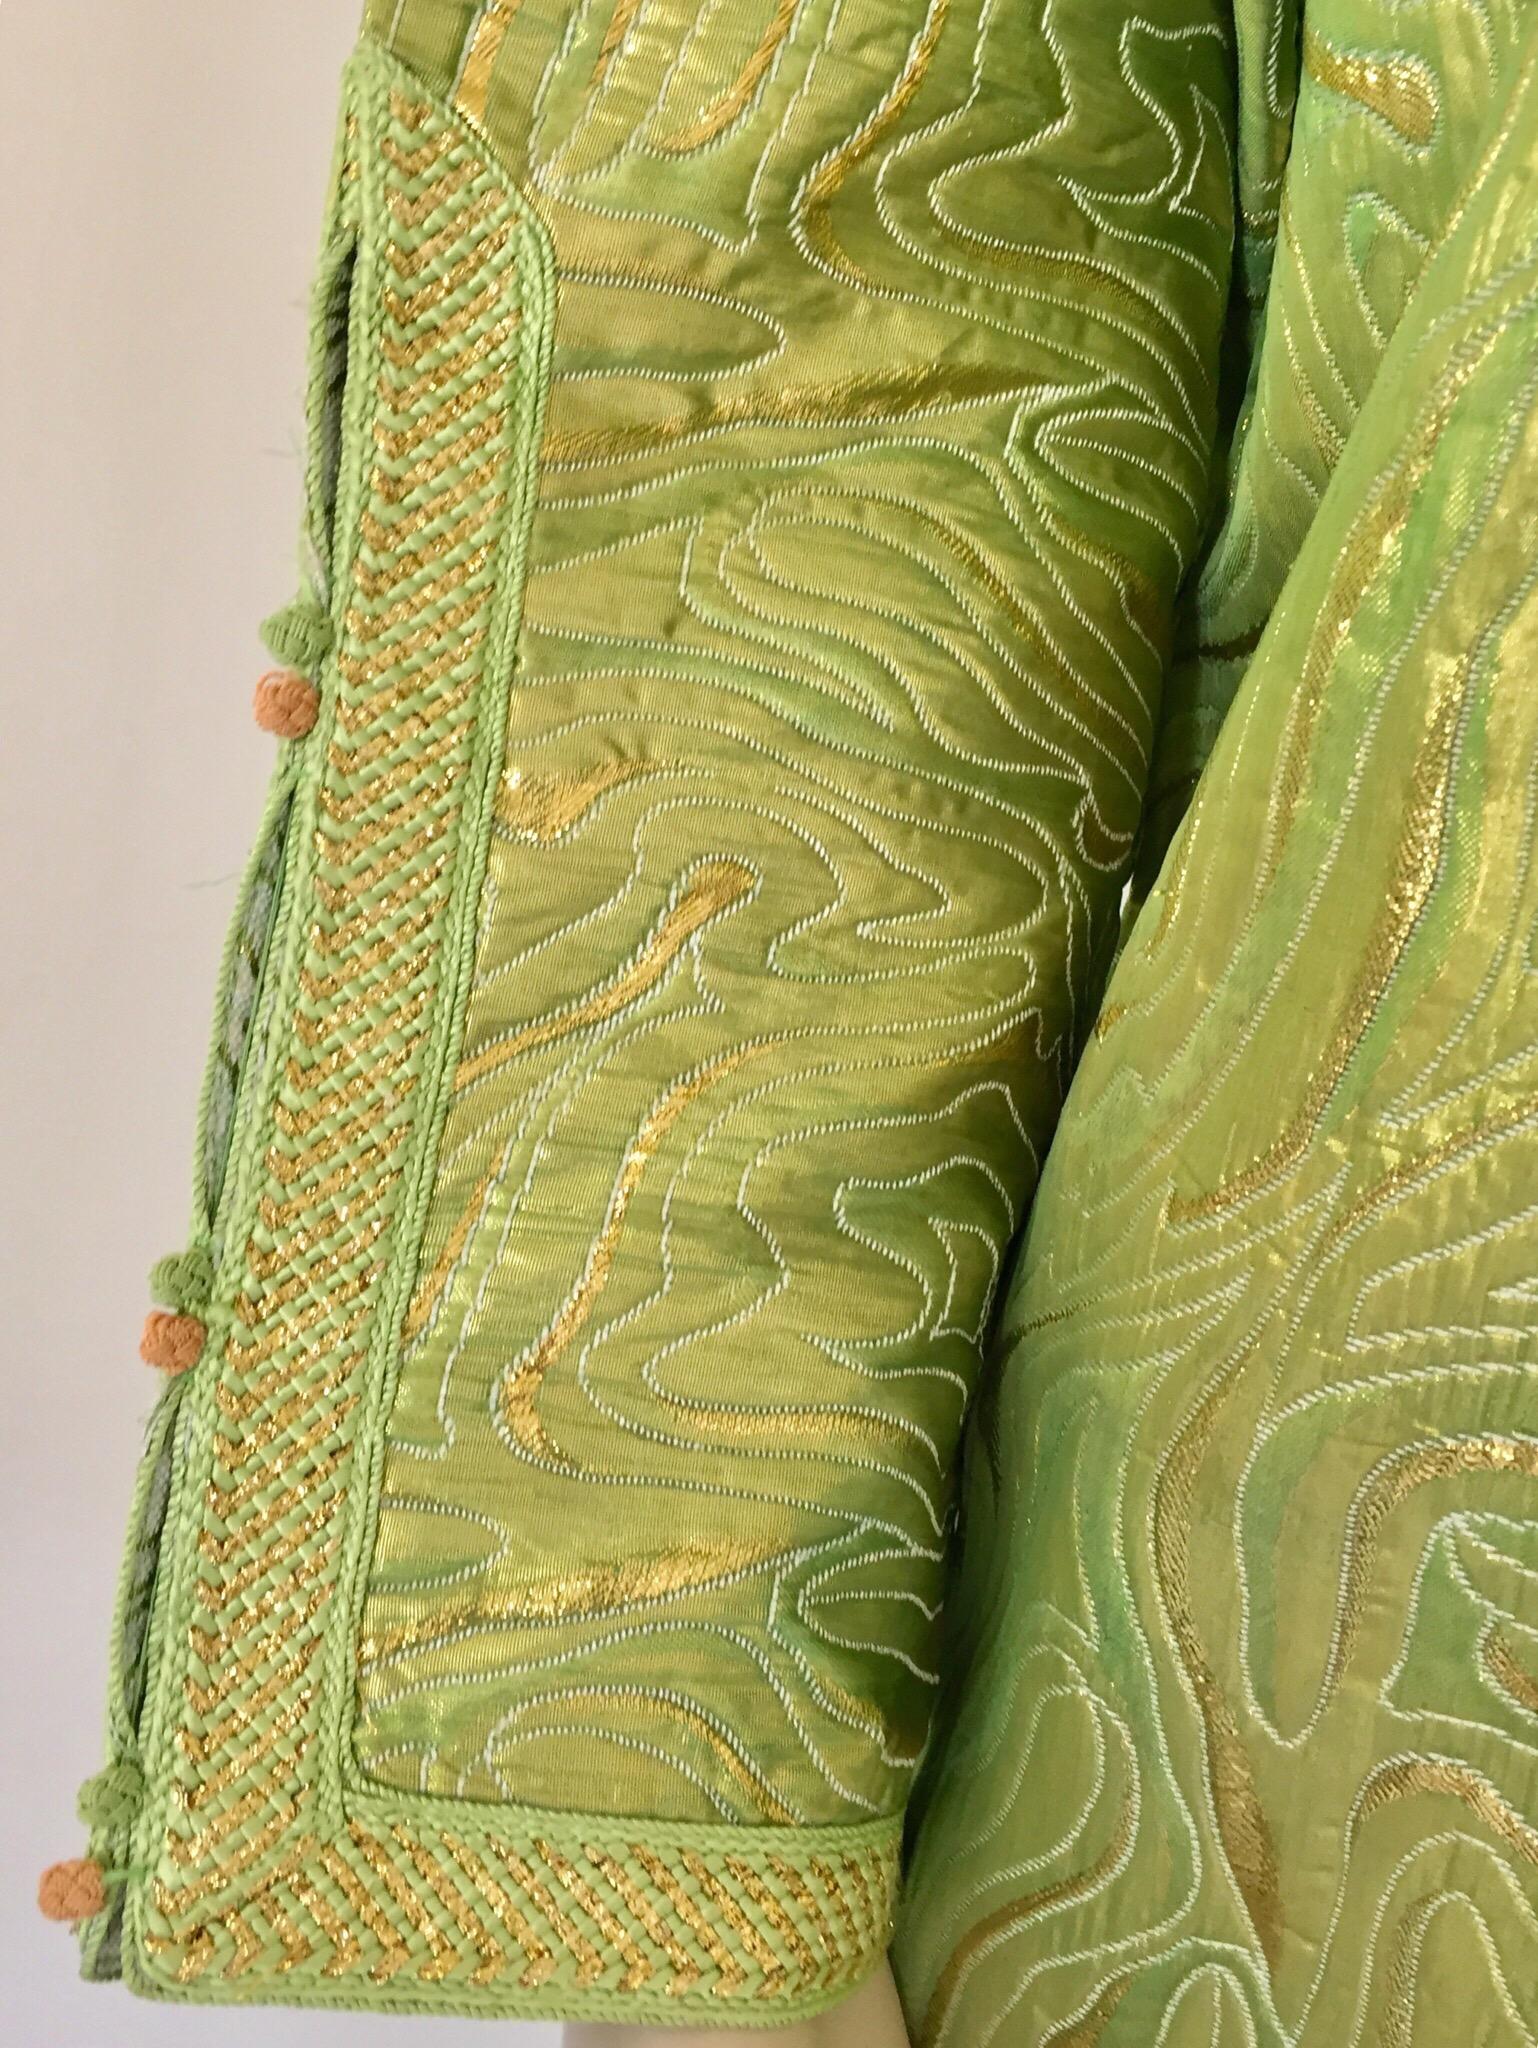 Elegant Moroccan caftan in green and gold lame metallic and embroidered trim,
circa 1970s.
This long maxi dress kaftan is embroidered and embellished entirely by hand.
It’s crafted in Morocco and tailored for a relaxed fit.
One of a kind evening